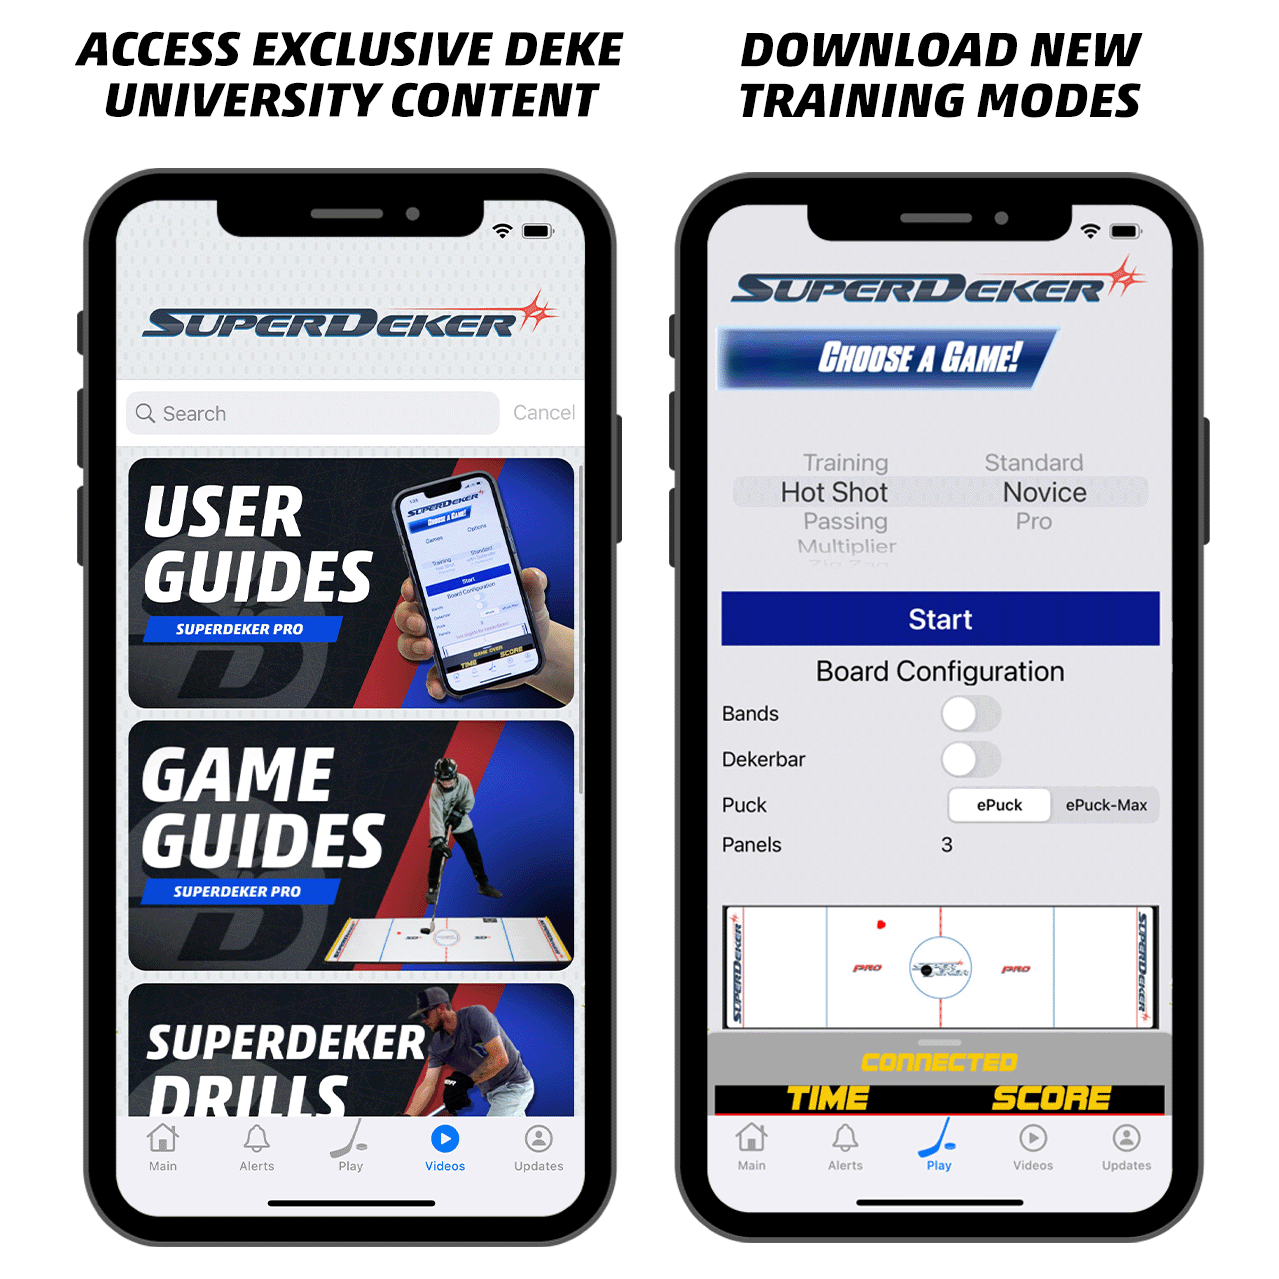 Use the SuperDekerPRO to learn how to get better at stickhandling in Hockey! This Fun Stickhandling Training Device uses lights and sensors and a connected App to improve your hockey skills!